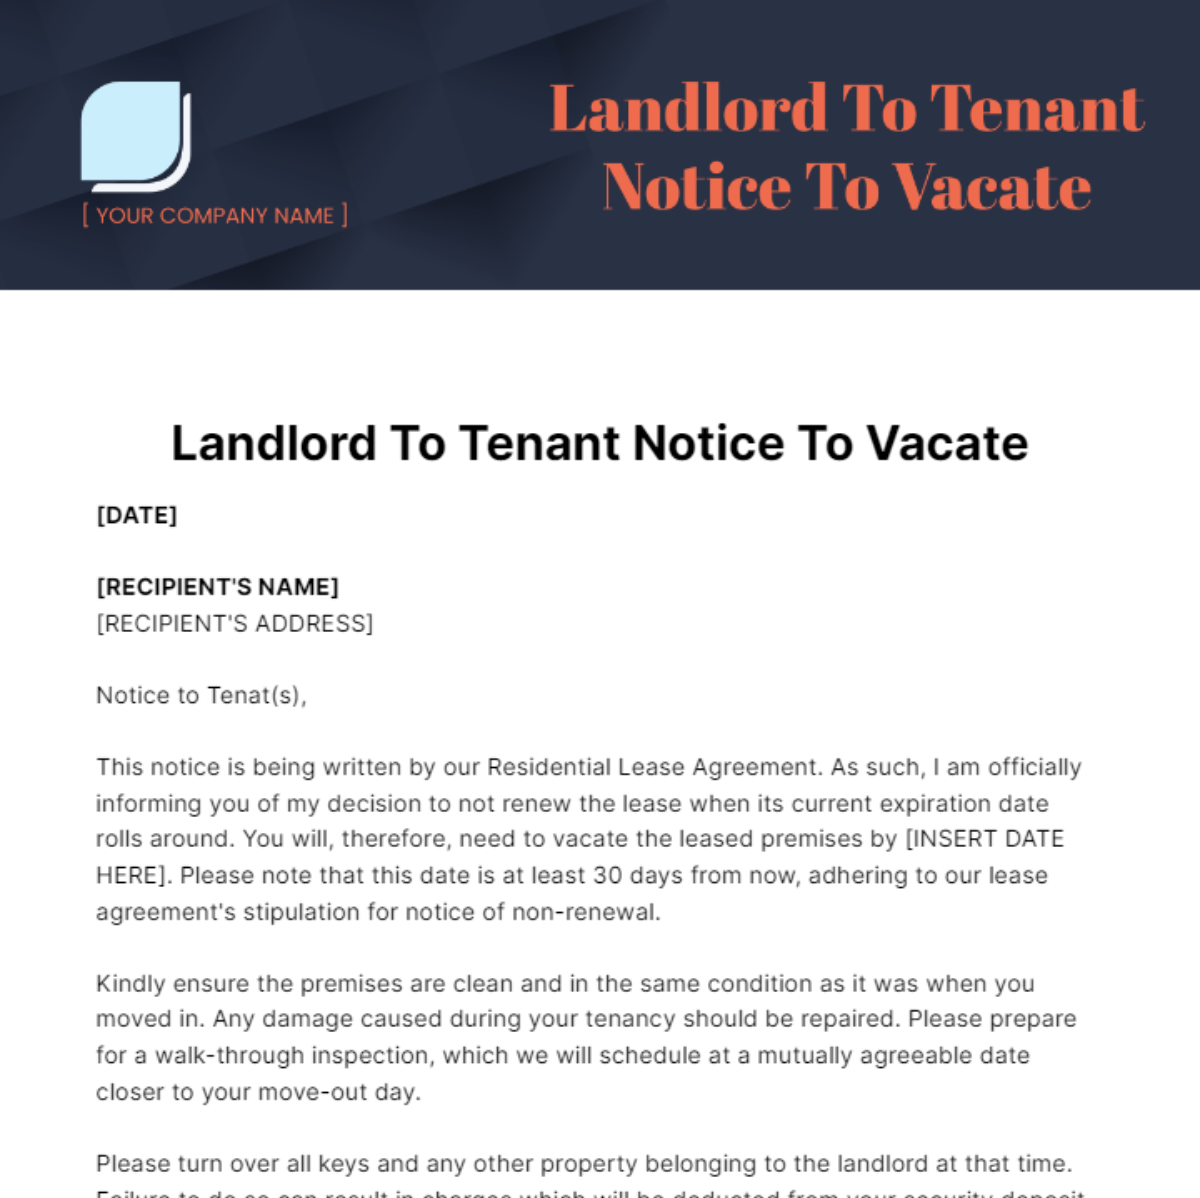 Free Landlord To Tenant Notice To Vacate Template